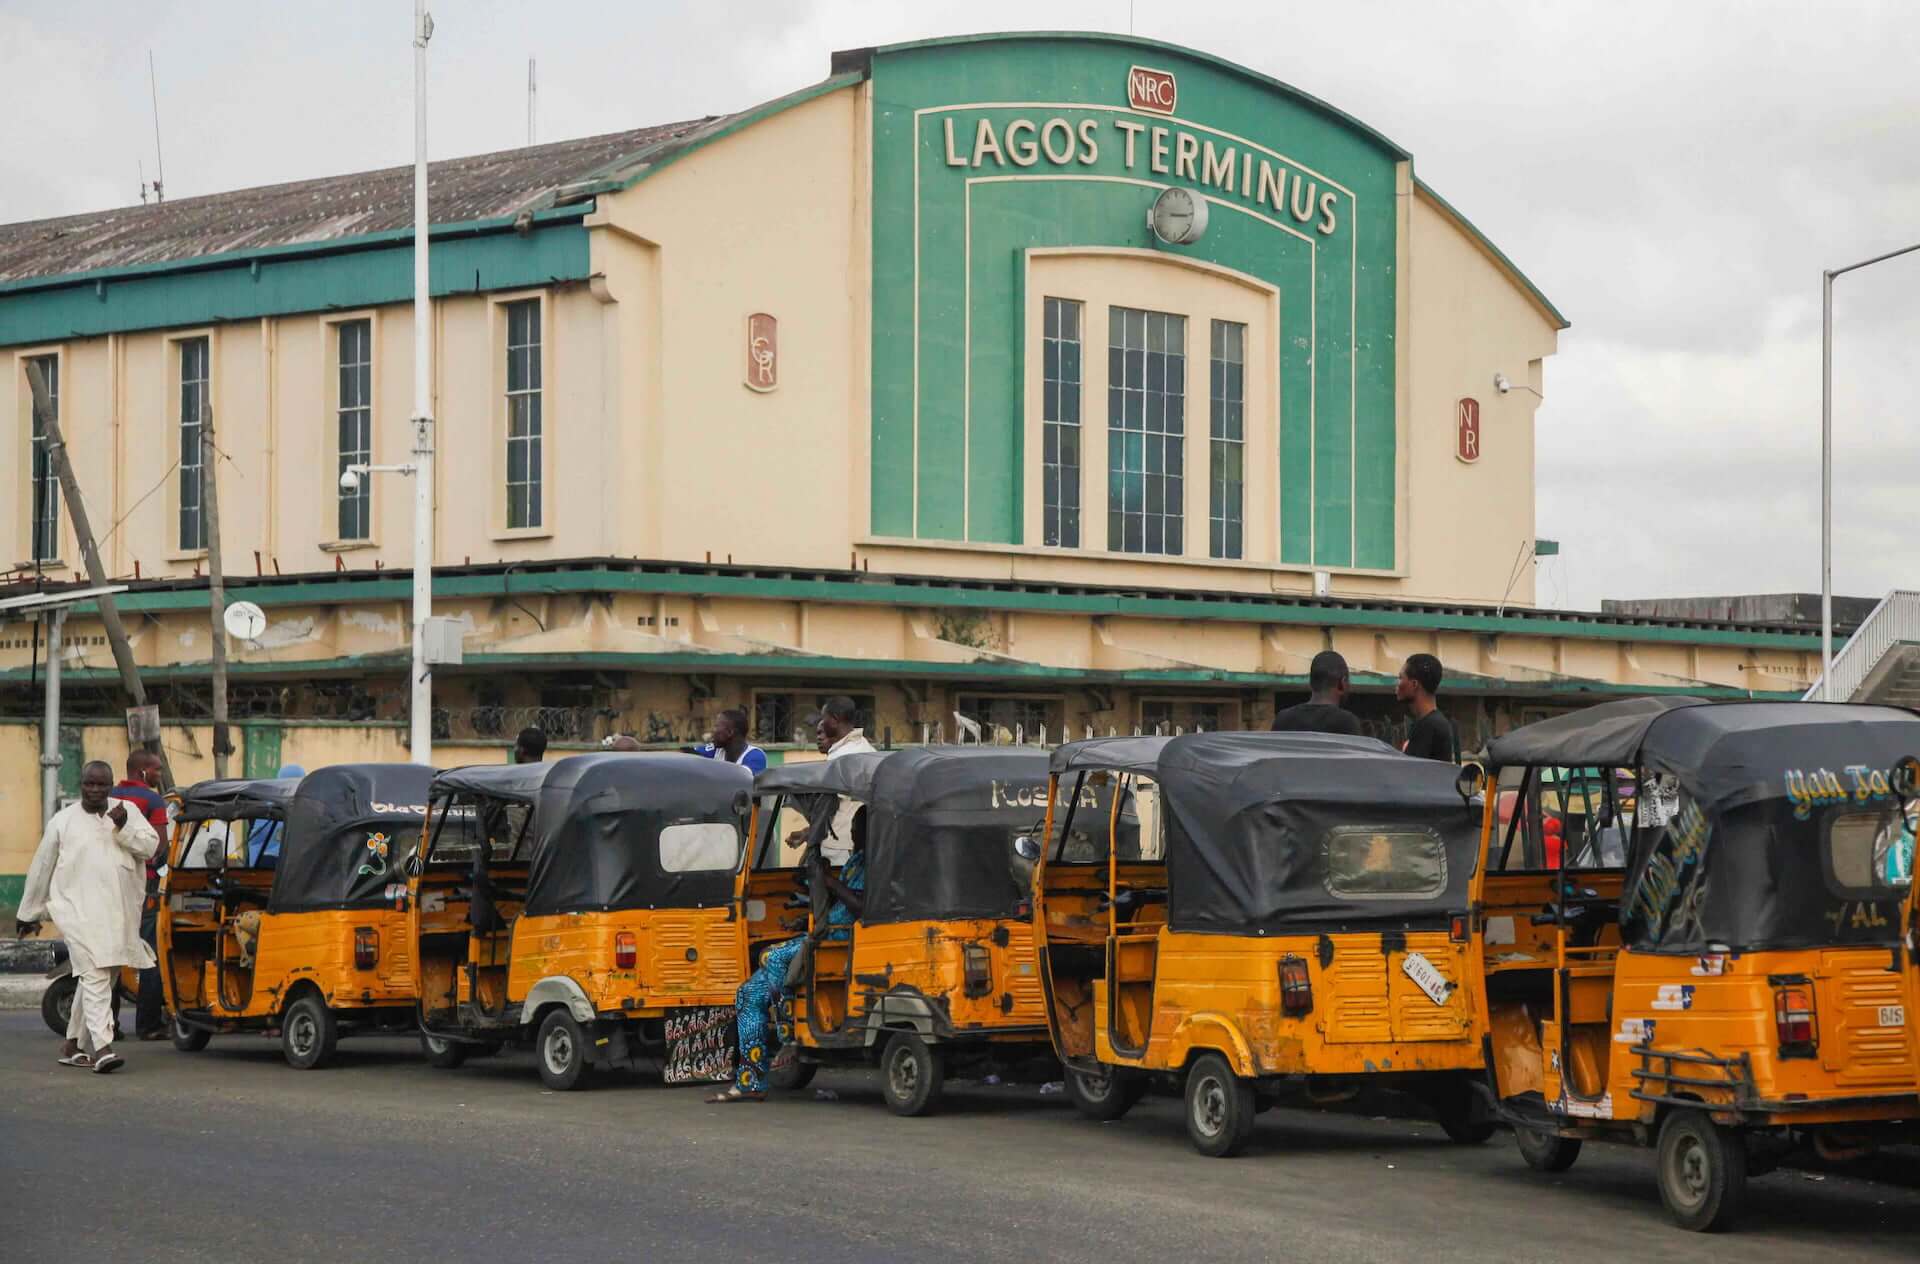 Tricycles, or keke napep, parked in a line outside the Lagos Terminus building.